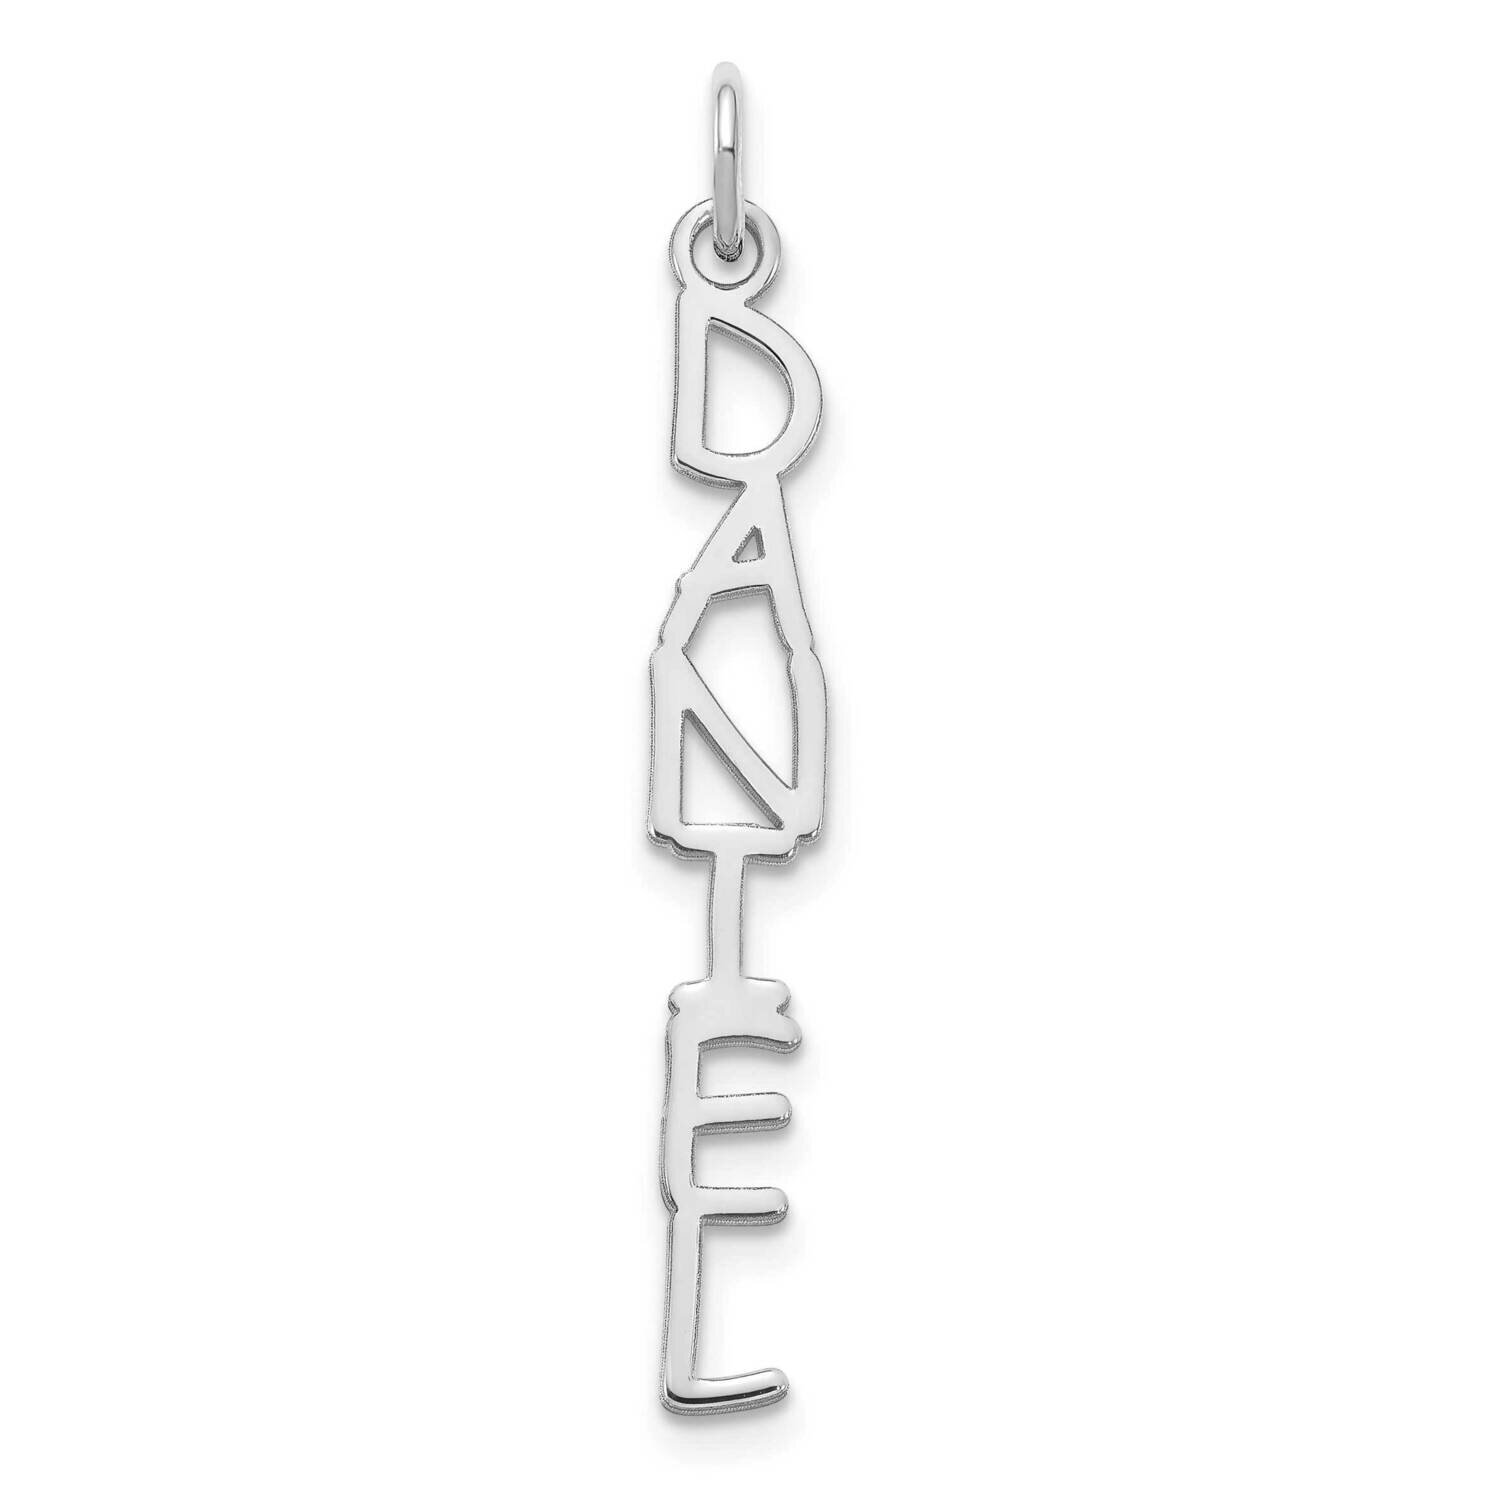 Comic Sans Font Vertical Name Plate Charm Sterling Silver Rhodium-plated XNA1168SS